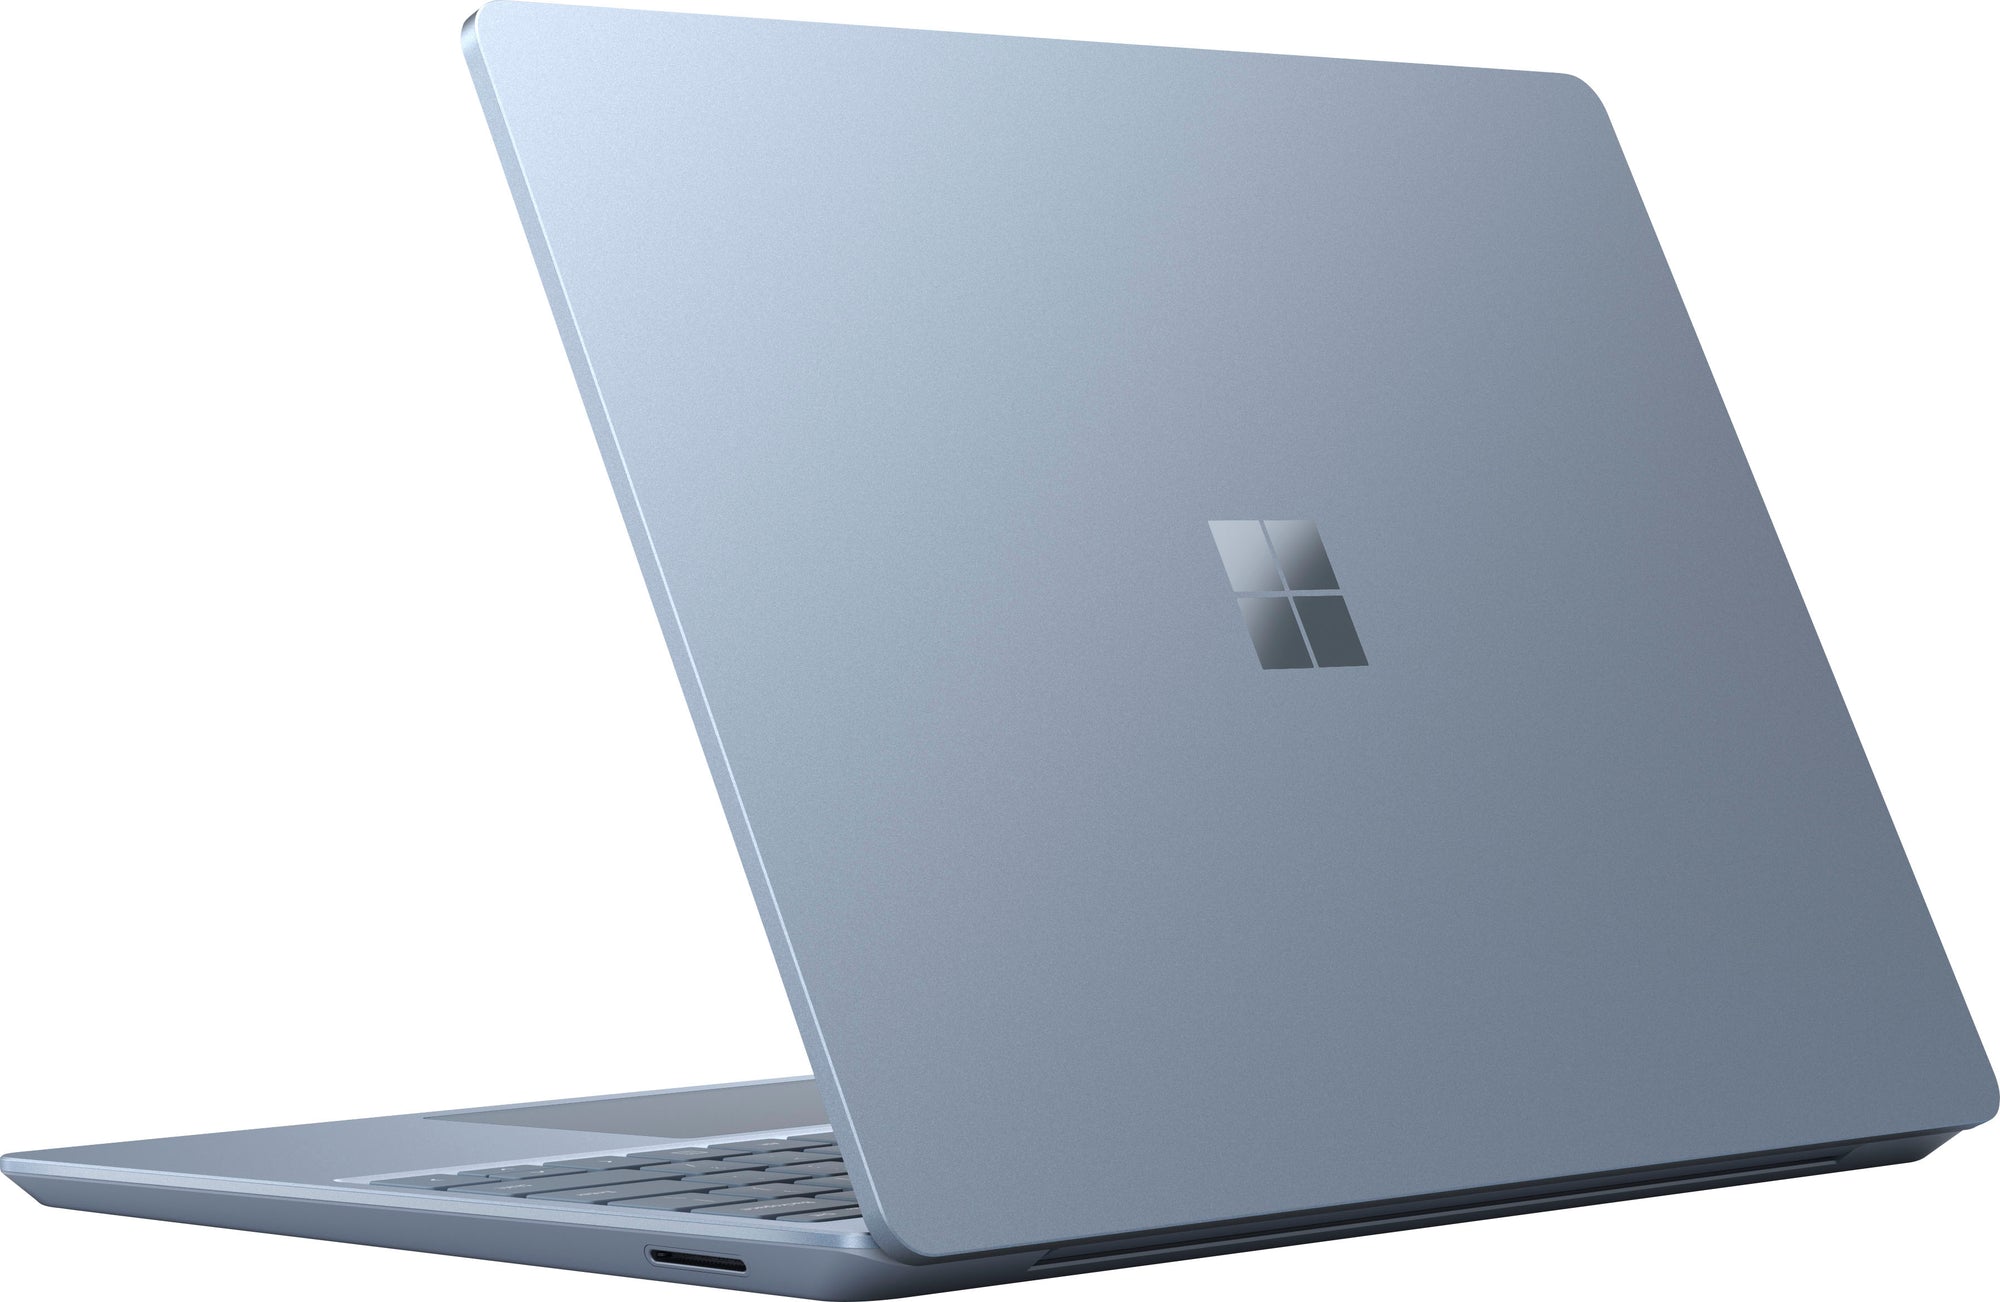 Microsoft - THH-00024 Surface Laptop Go - 12.4" Touch-Screen - Intel 10th Generation Core i5 - 8GB Memory - 128GB Solid State Drive - Ice Blue